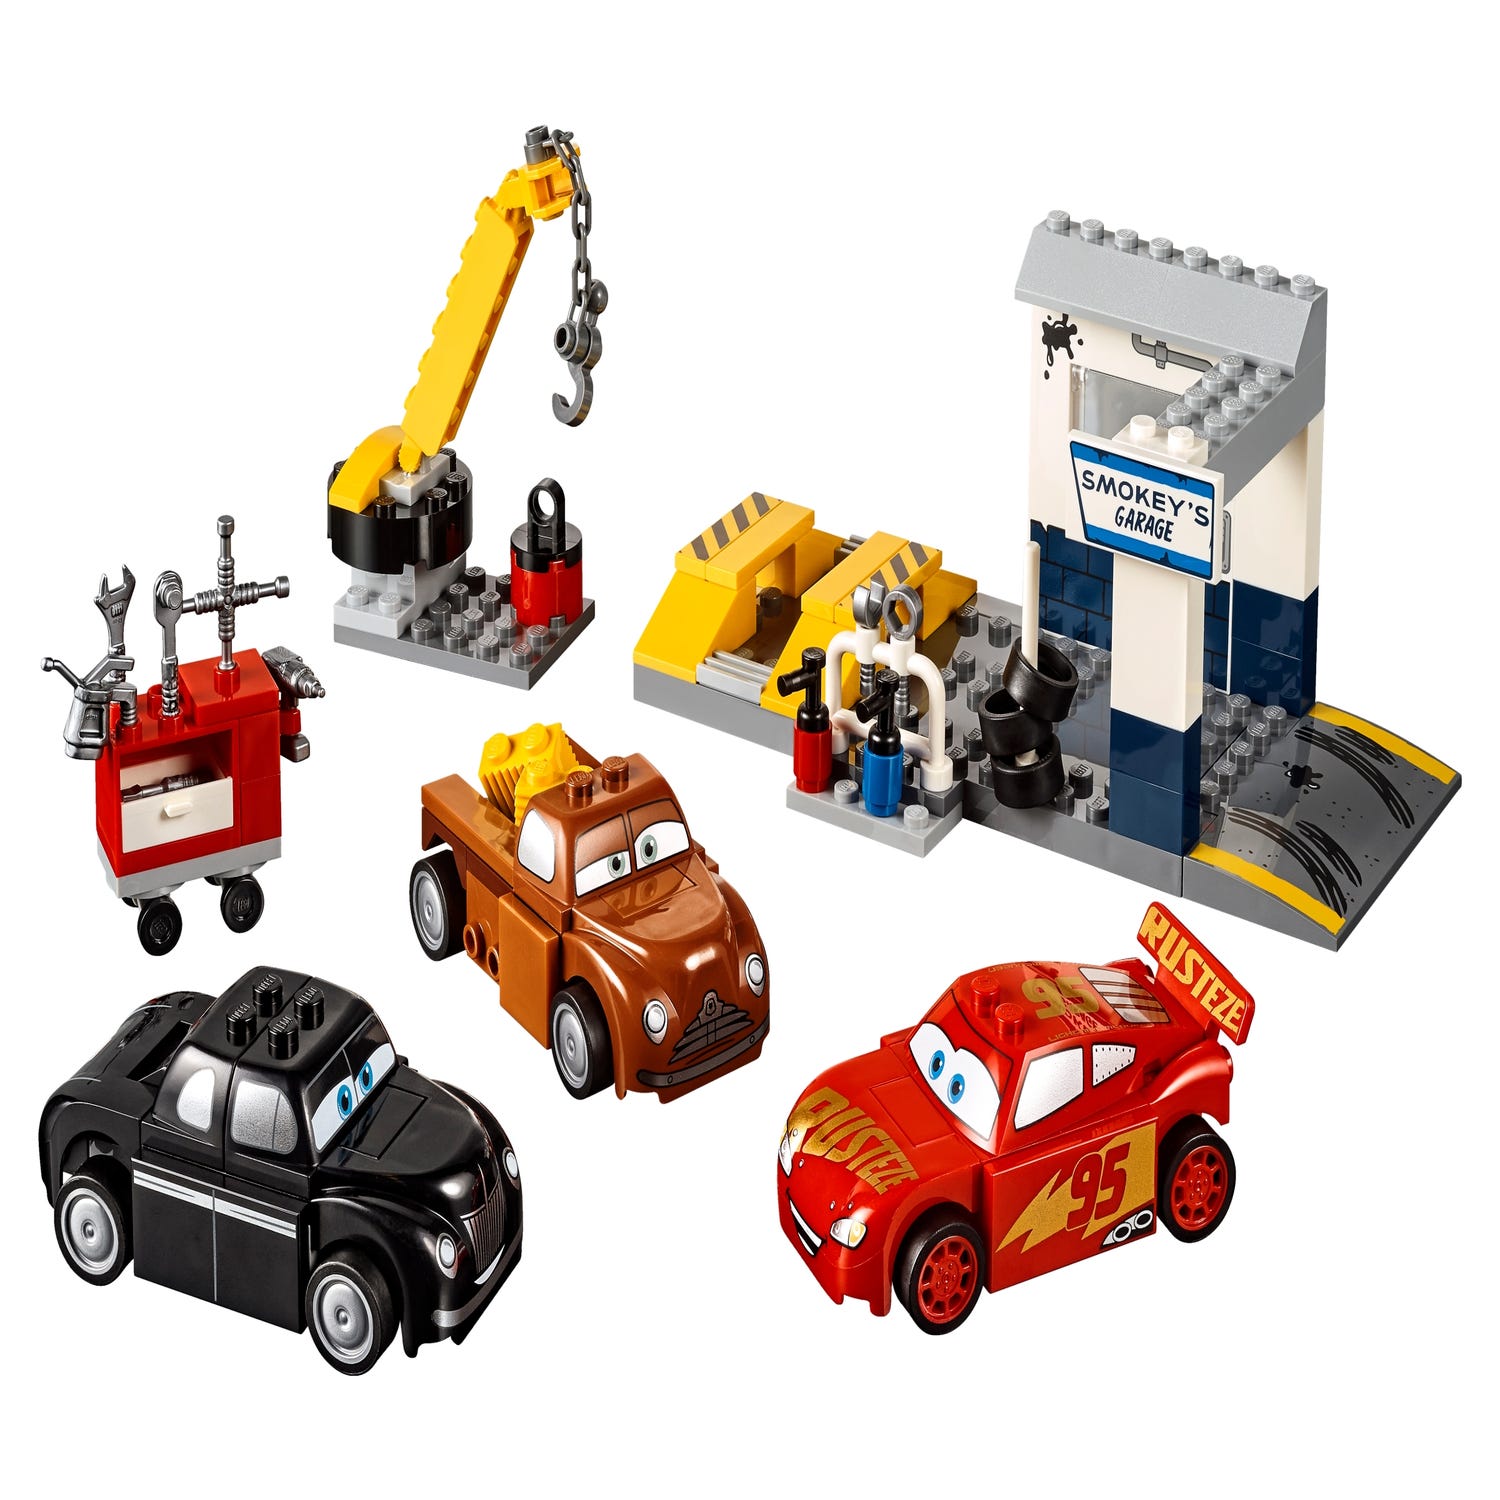 Smokey's Garage 10743 | Juniors | Buy online at the Official LEGO® Shop US